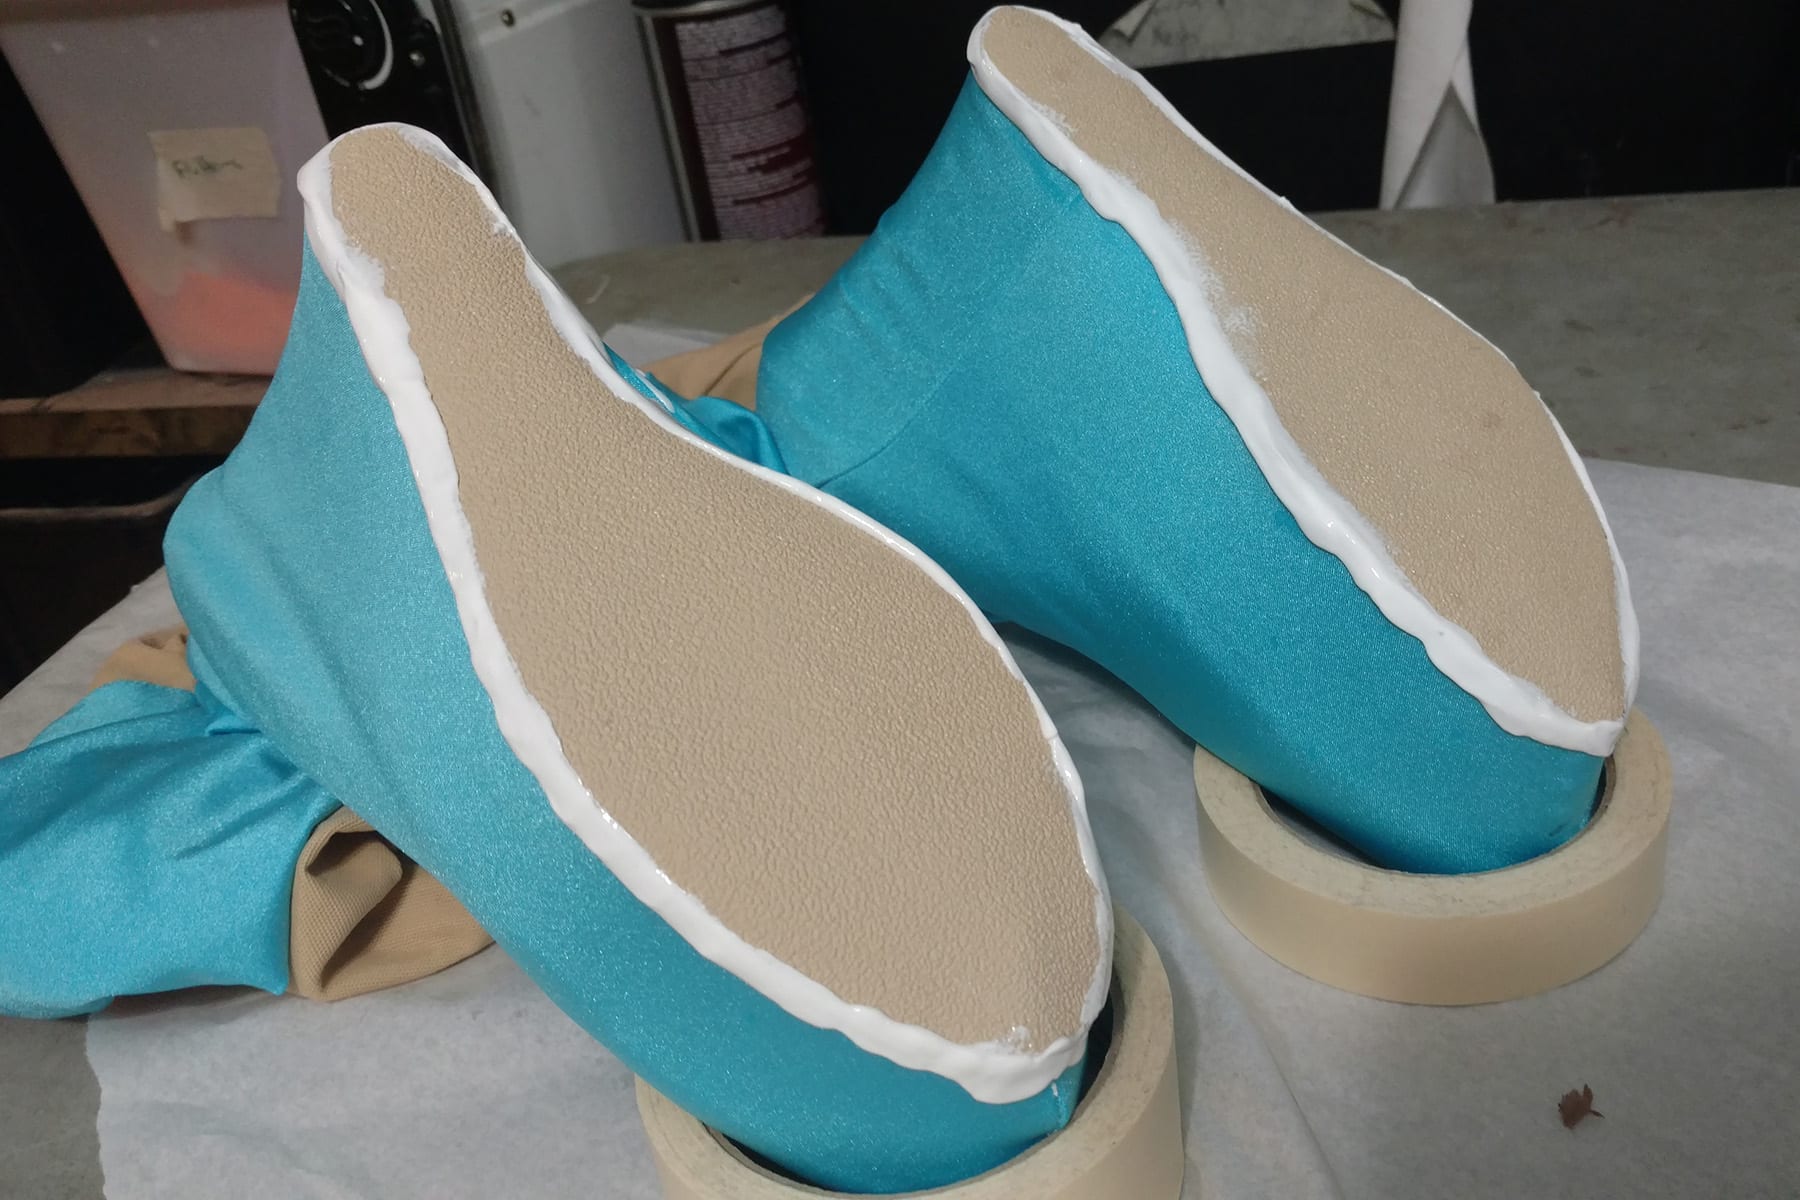 Two shoes covered in blue fabric are shown upside down, the toes balanced on rolls of masking tape. The beige soles are edged in wet caulking, appearing white.